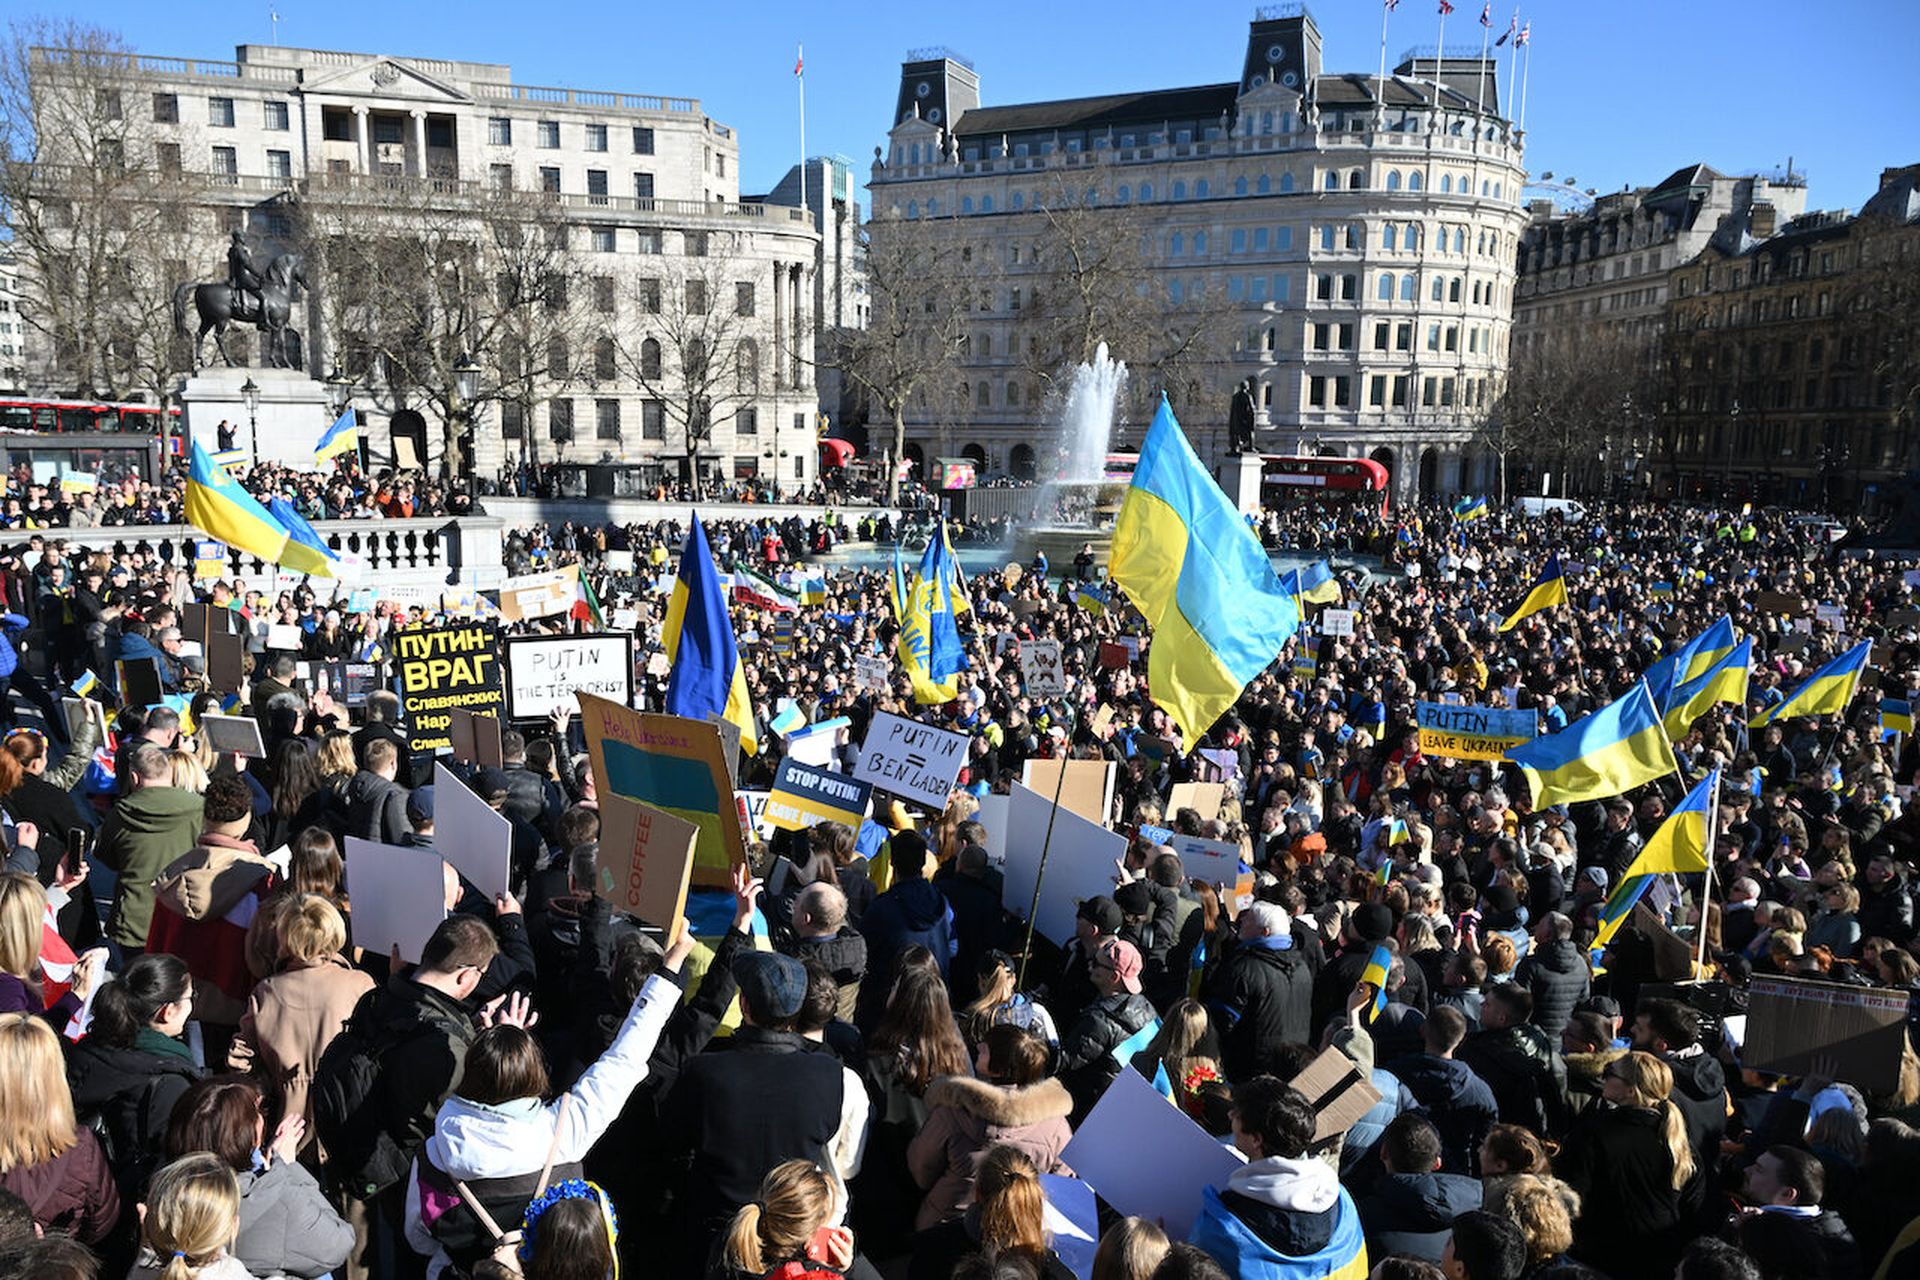 Protesters wave Ukrainian flags as they gather for a demonstration in support of Ukraine in Trafalgar Square on February 27 in London. As the war intensifies, cyberattacks loom. Today’s columnist, Rick Holland of Digital Shadows, offers some advice for security pros looking to protect their systems from Russian attacks. (Photo by Leon Neal/Getty Im...